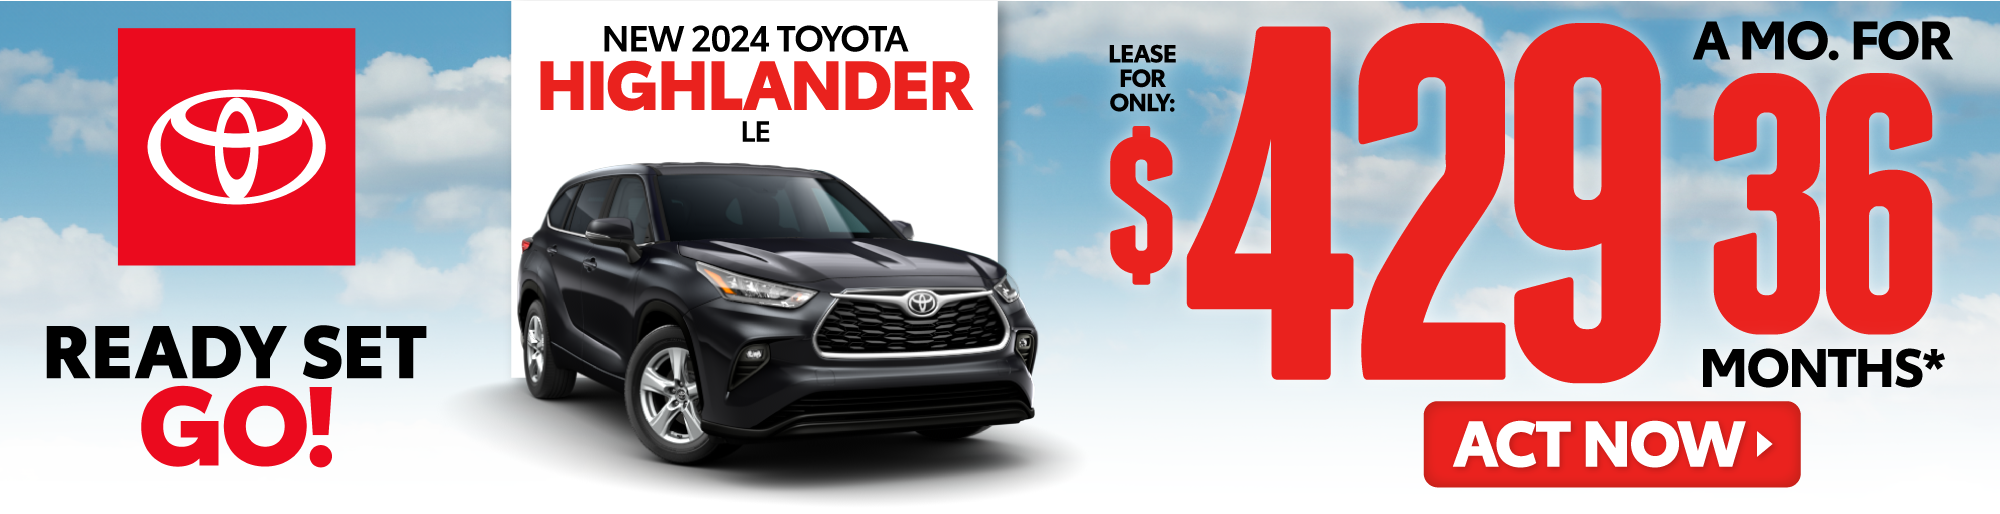 New 2023 Toyota Highlander Lease for only $409/mo.* ACT NOW